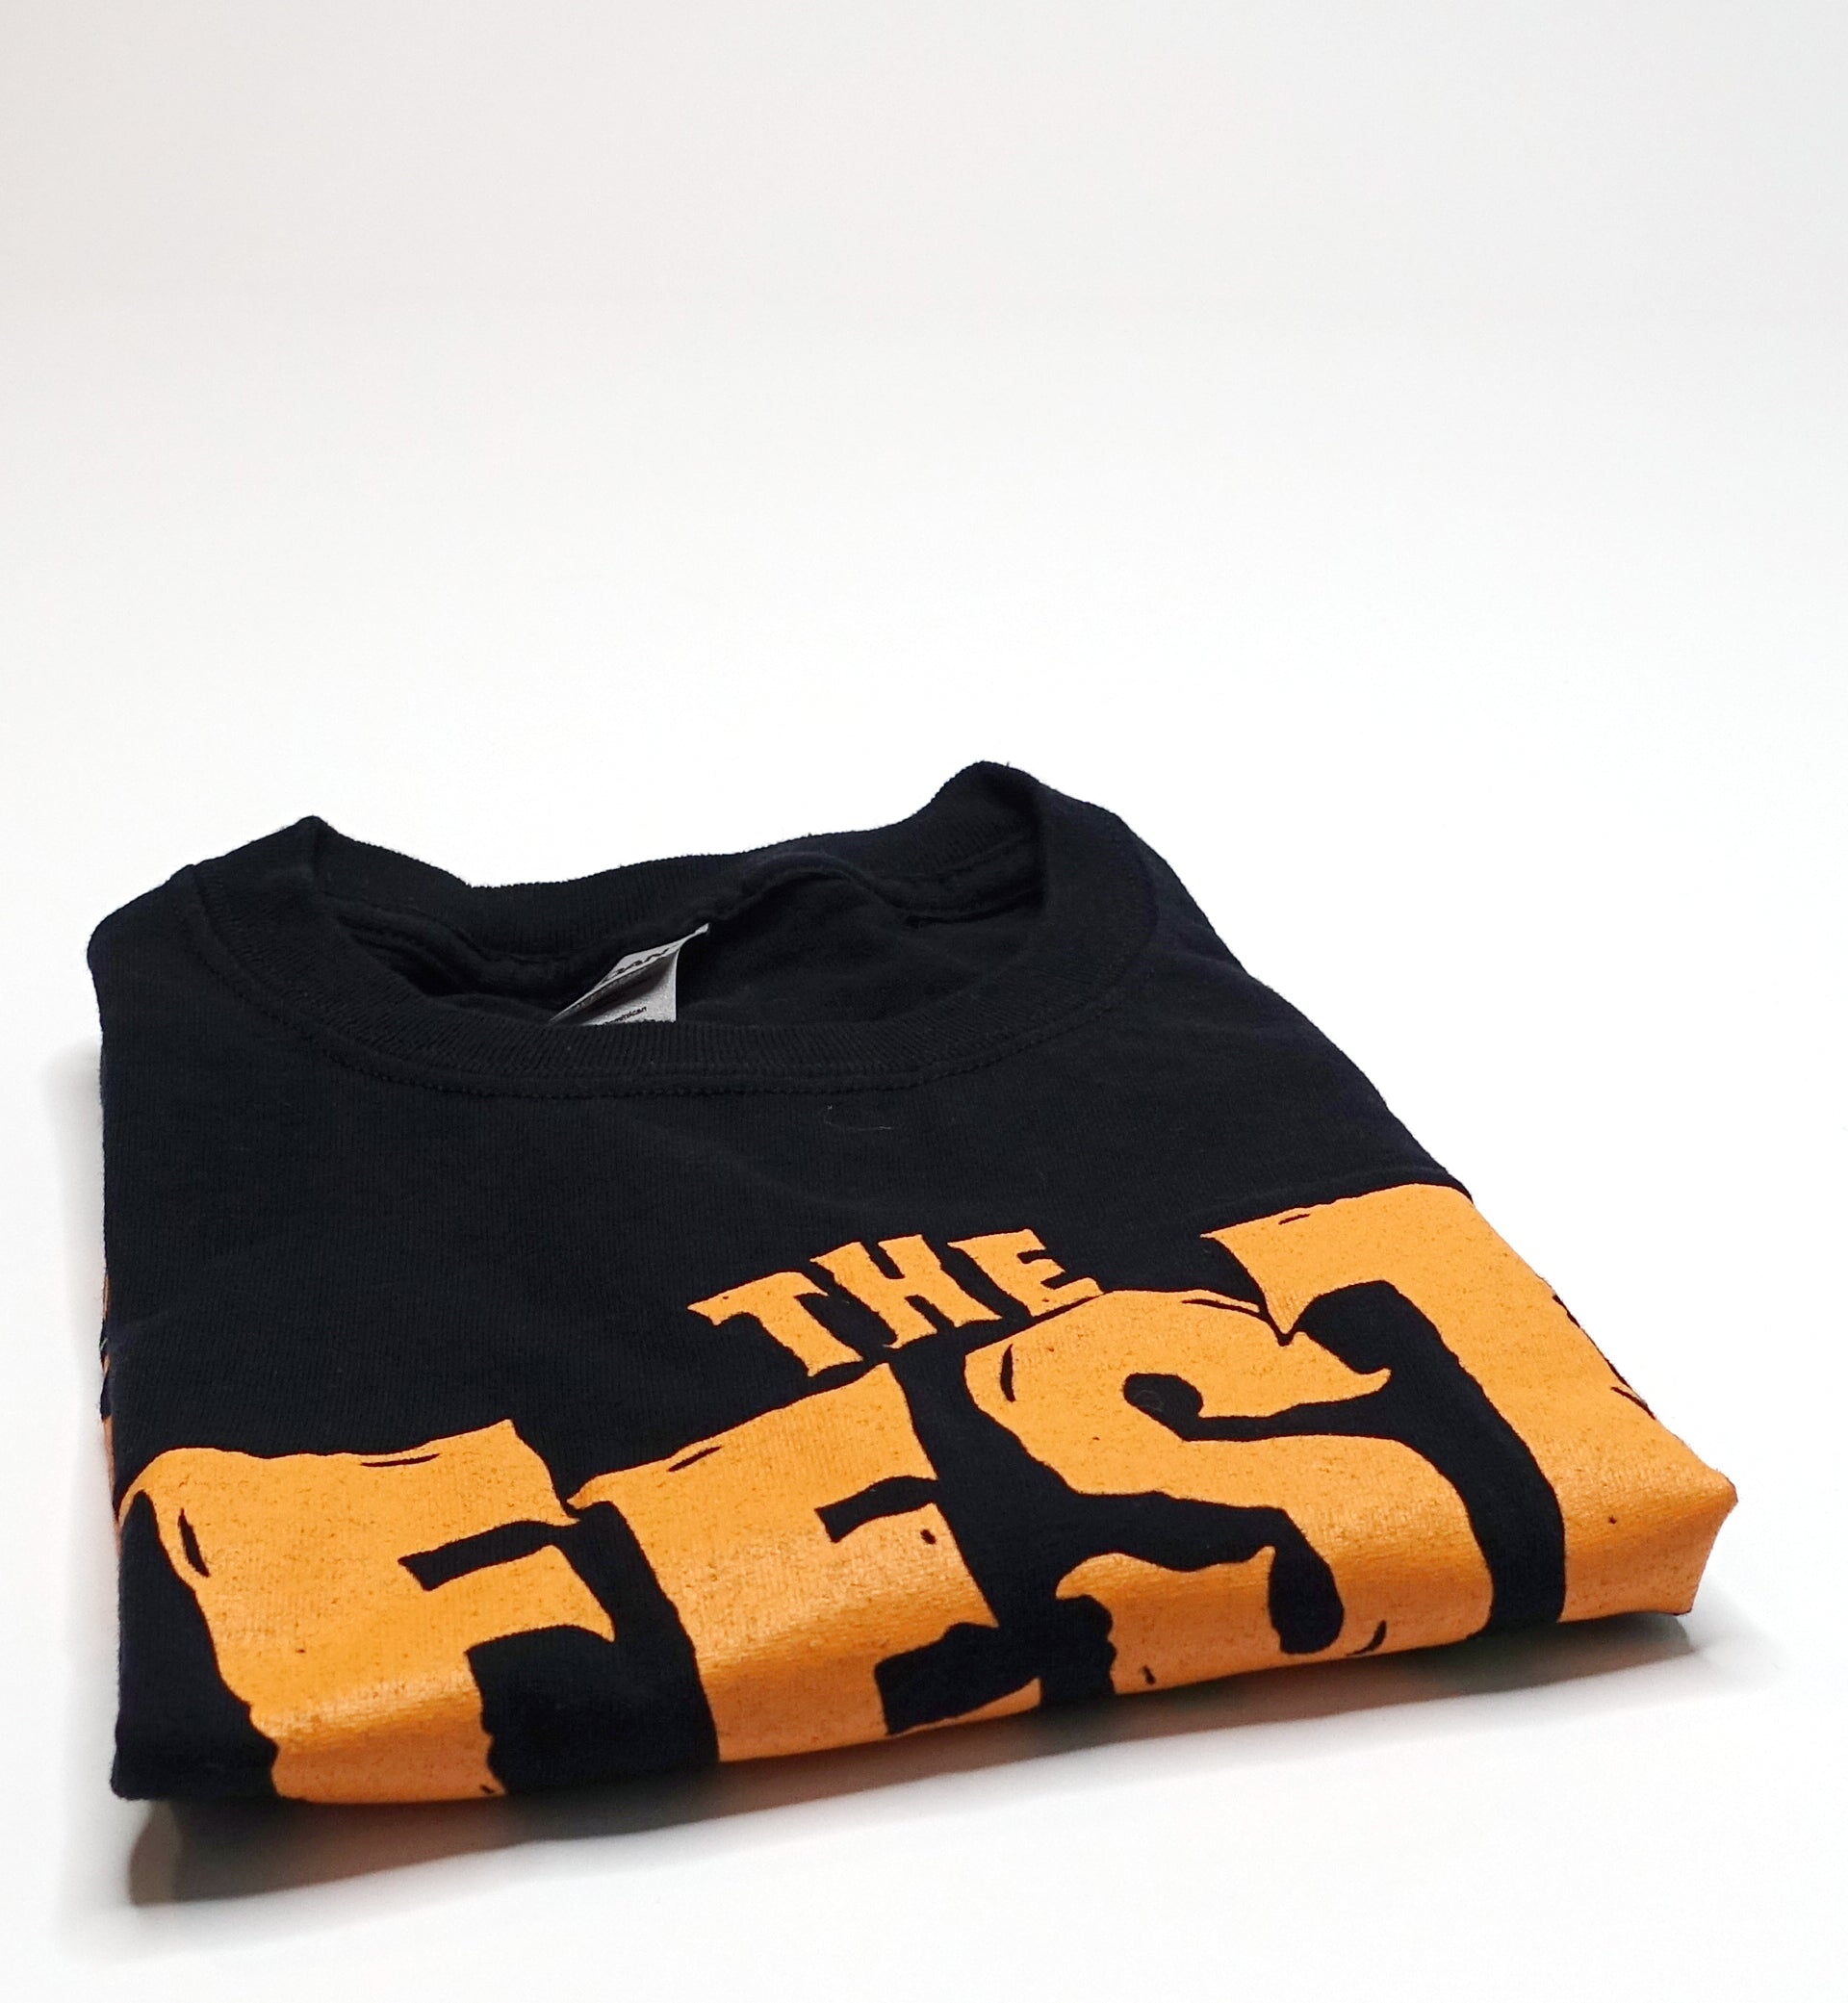 The Fest - The Fest That never Was 2020 Shirt Size Small